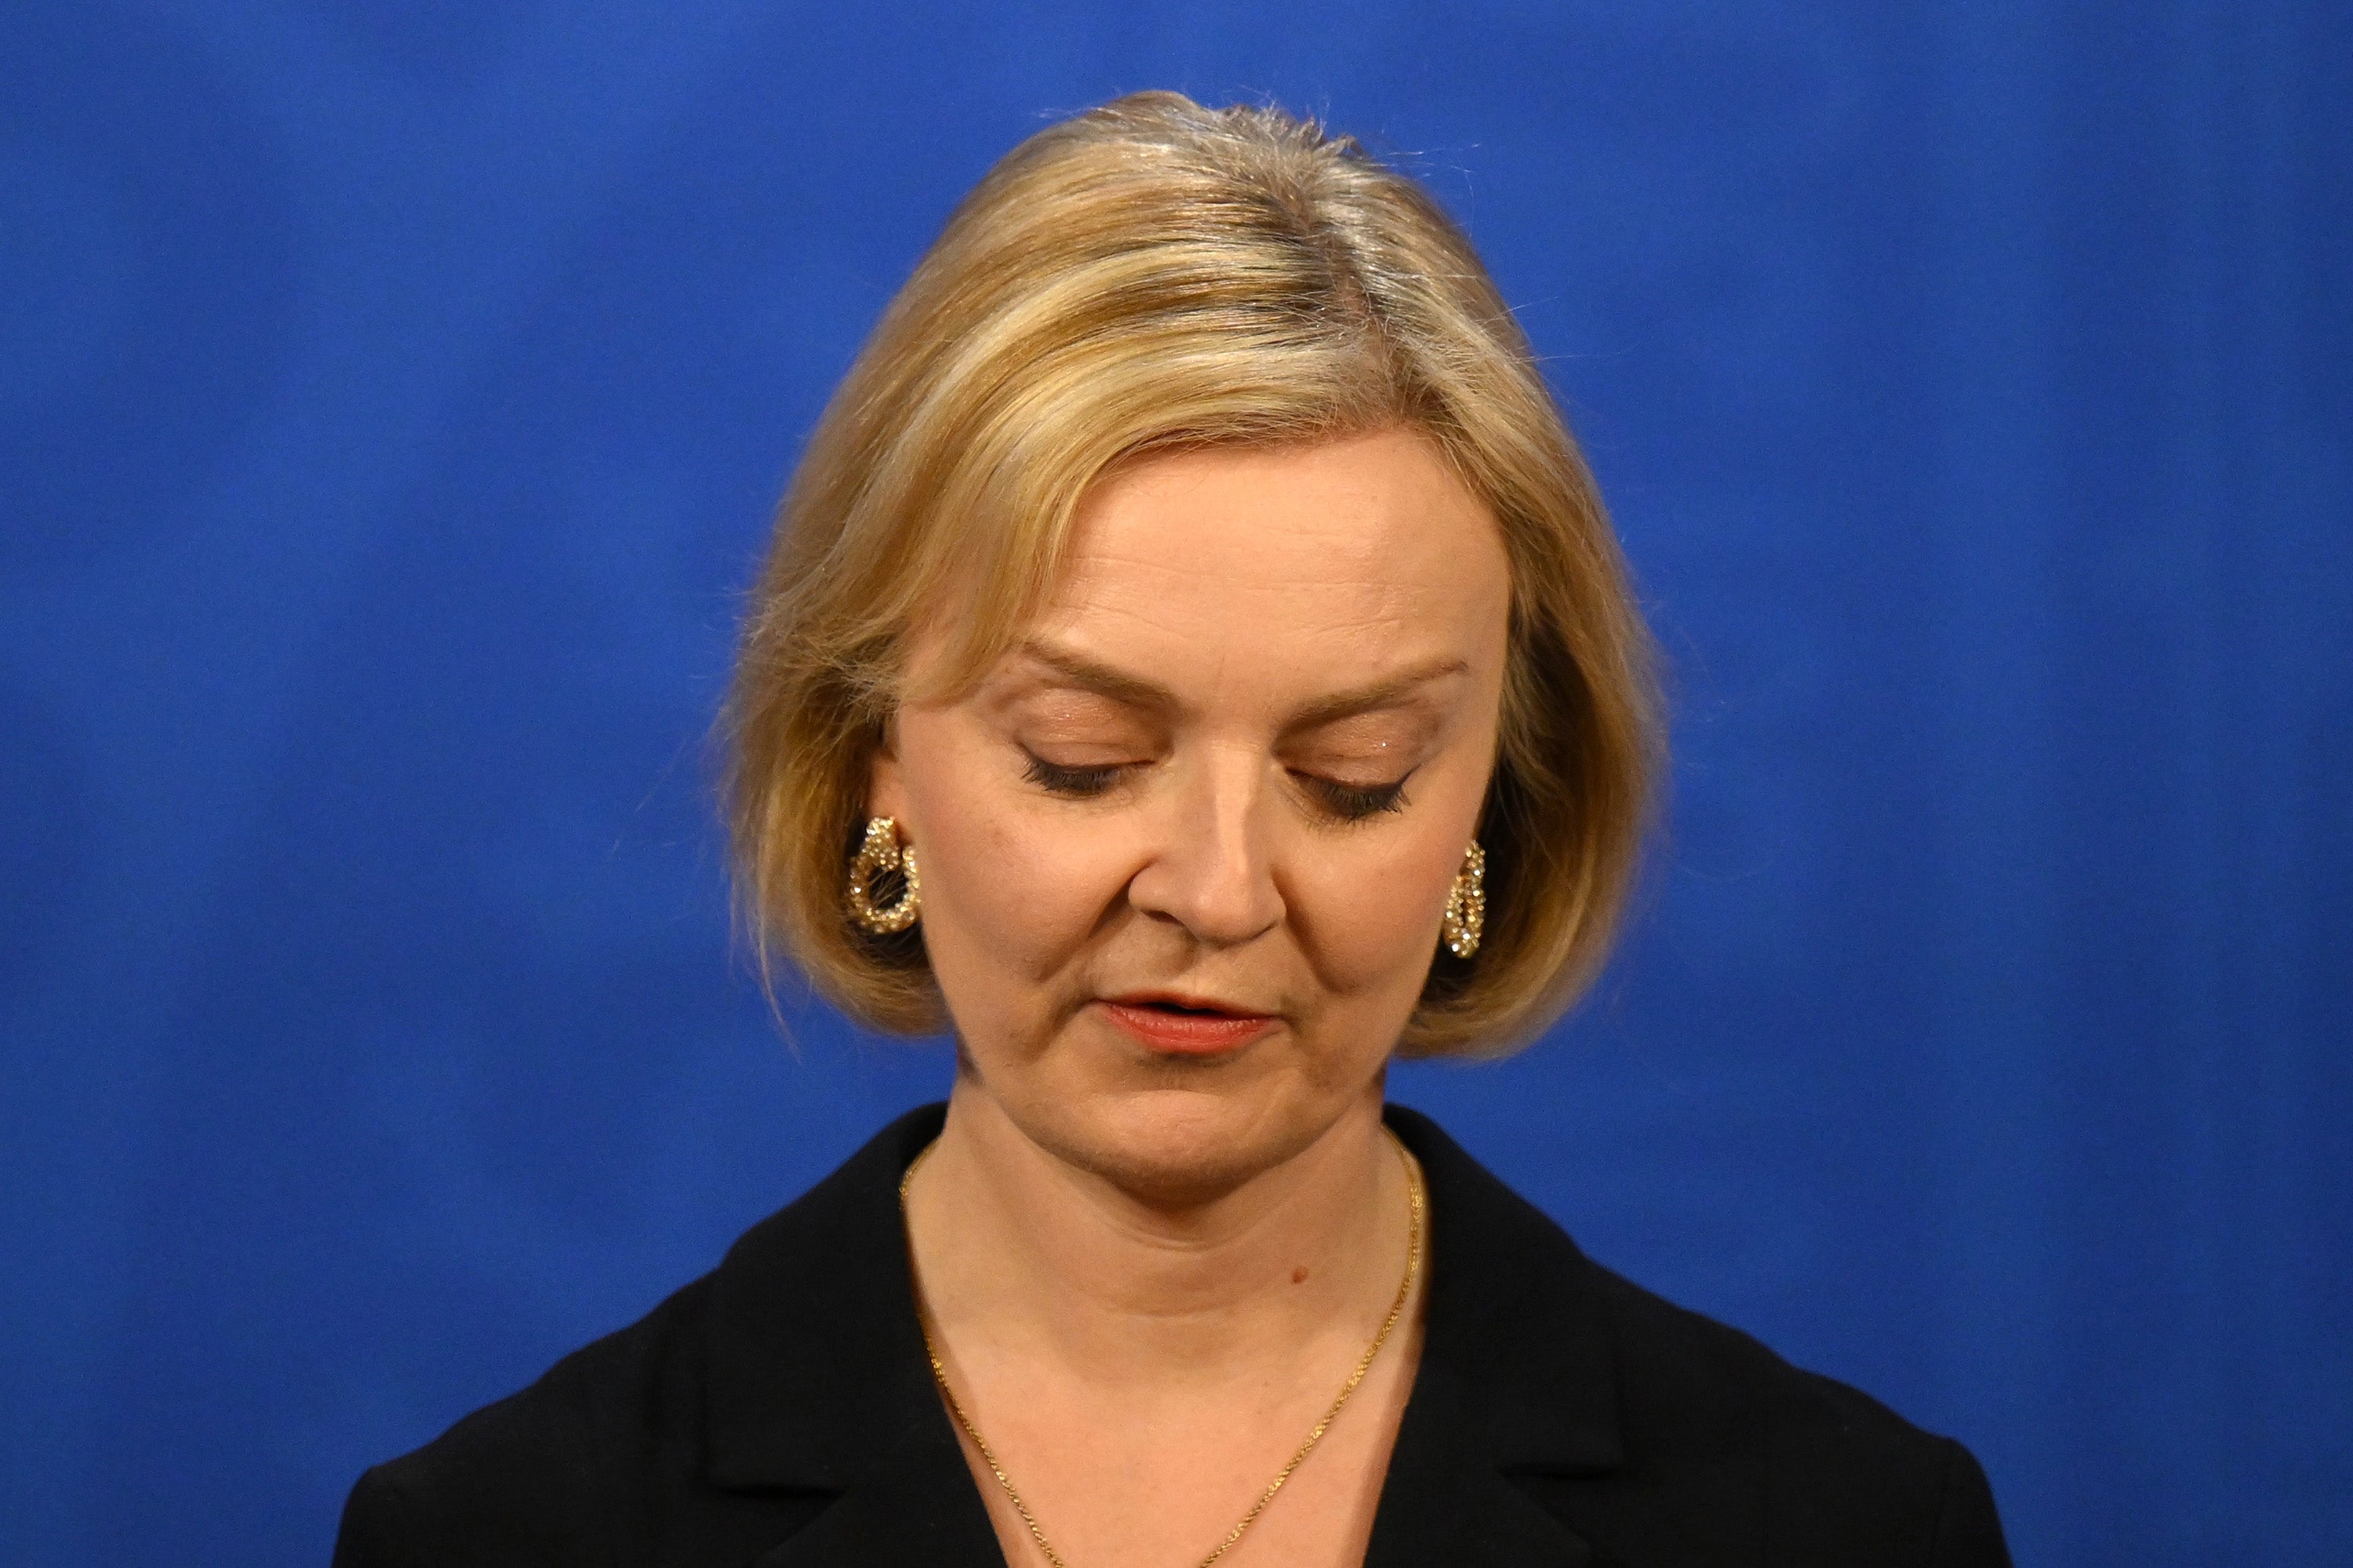 Liz Truss may be on borrowed time as prime minister